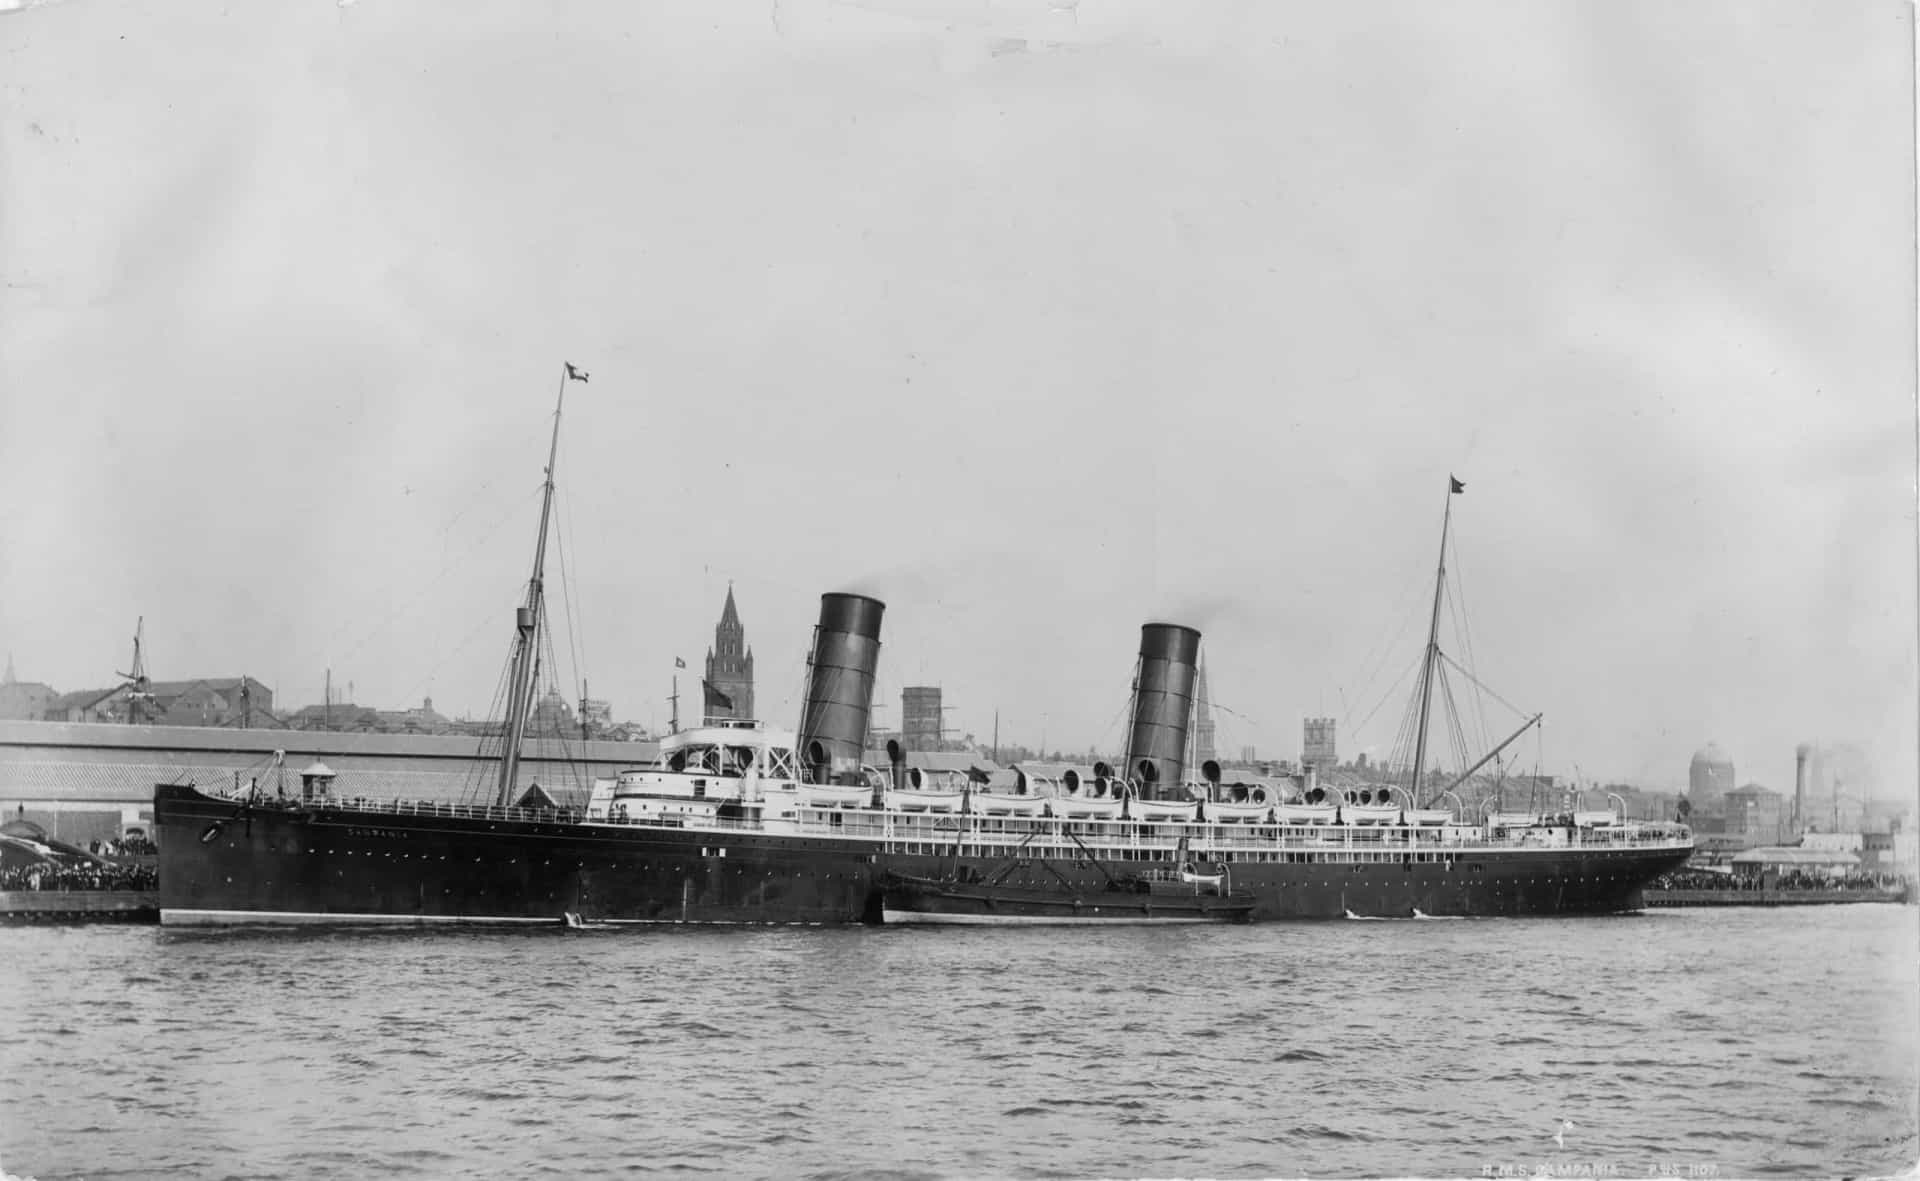 <p>Launched in September 1892, Cunard's RMS <em>Campania</em> was the largest and fastest passenger liner afloat when she entered service in 1893. She won the coveted Blue Riband for a less-than-six-day dash across the Atlantic Ocean.</p><p>You may also like:<a href="https://www.starsinsider.com/n/394782?utm_source=msn.com&utm_medium=display&utm_campaign=referral_description&utm_content=597926en-za"> The most unbelievably expensive weddings in history </a></p>